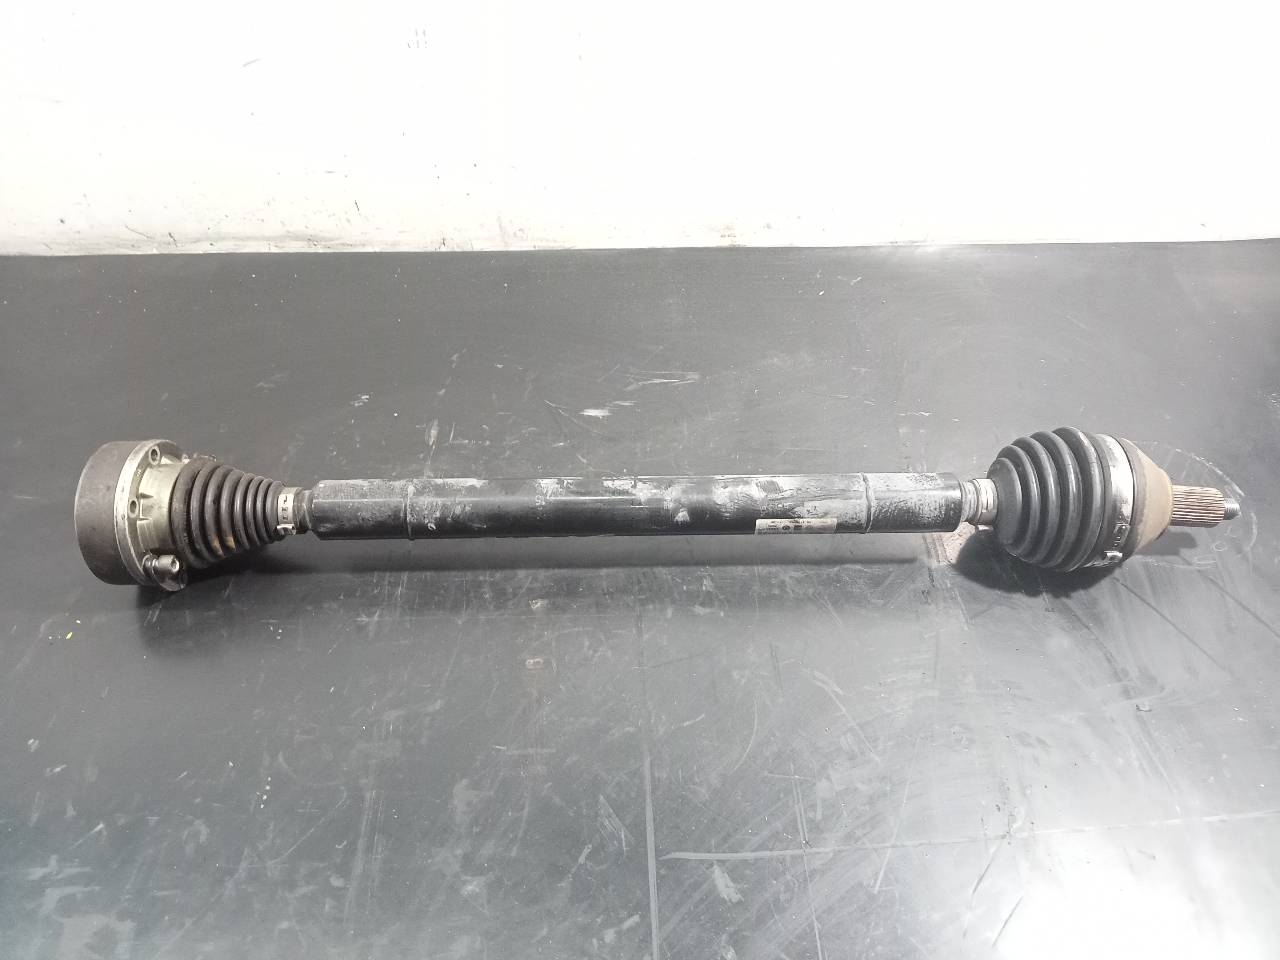 SEAT Toledo 4 generation (2012-2020) Front Right Driveshaft 6R0407762A, P1-B6-37 21800162